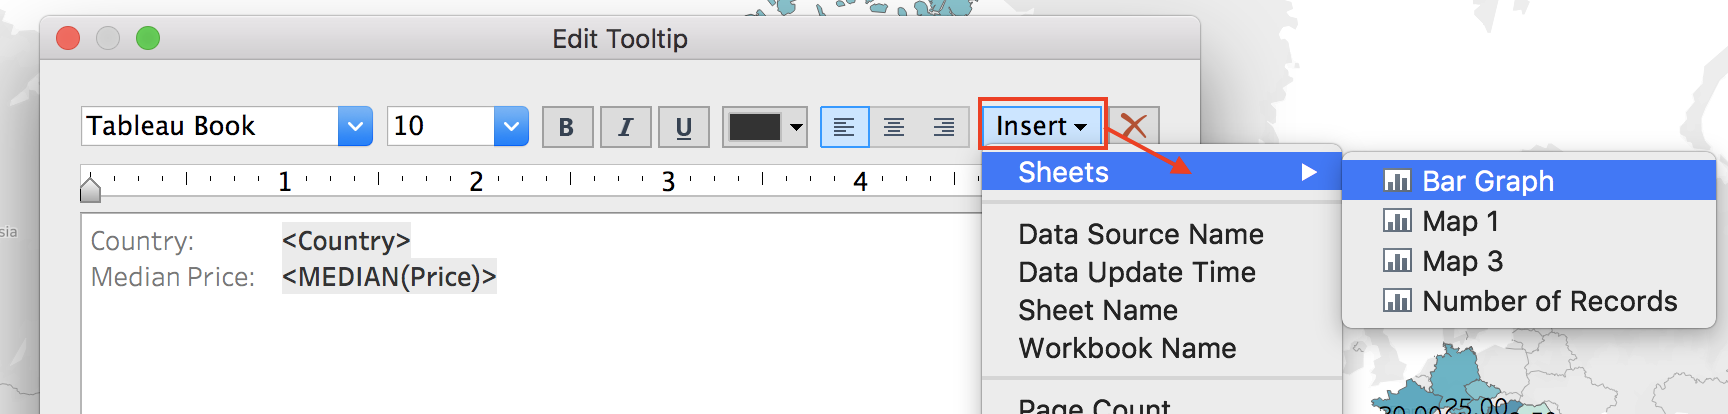 Insert the Bar Graph sheet into the Tooltip.